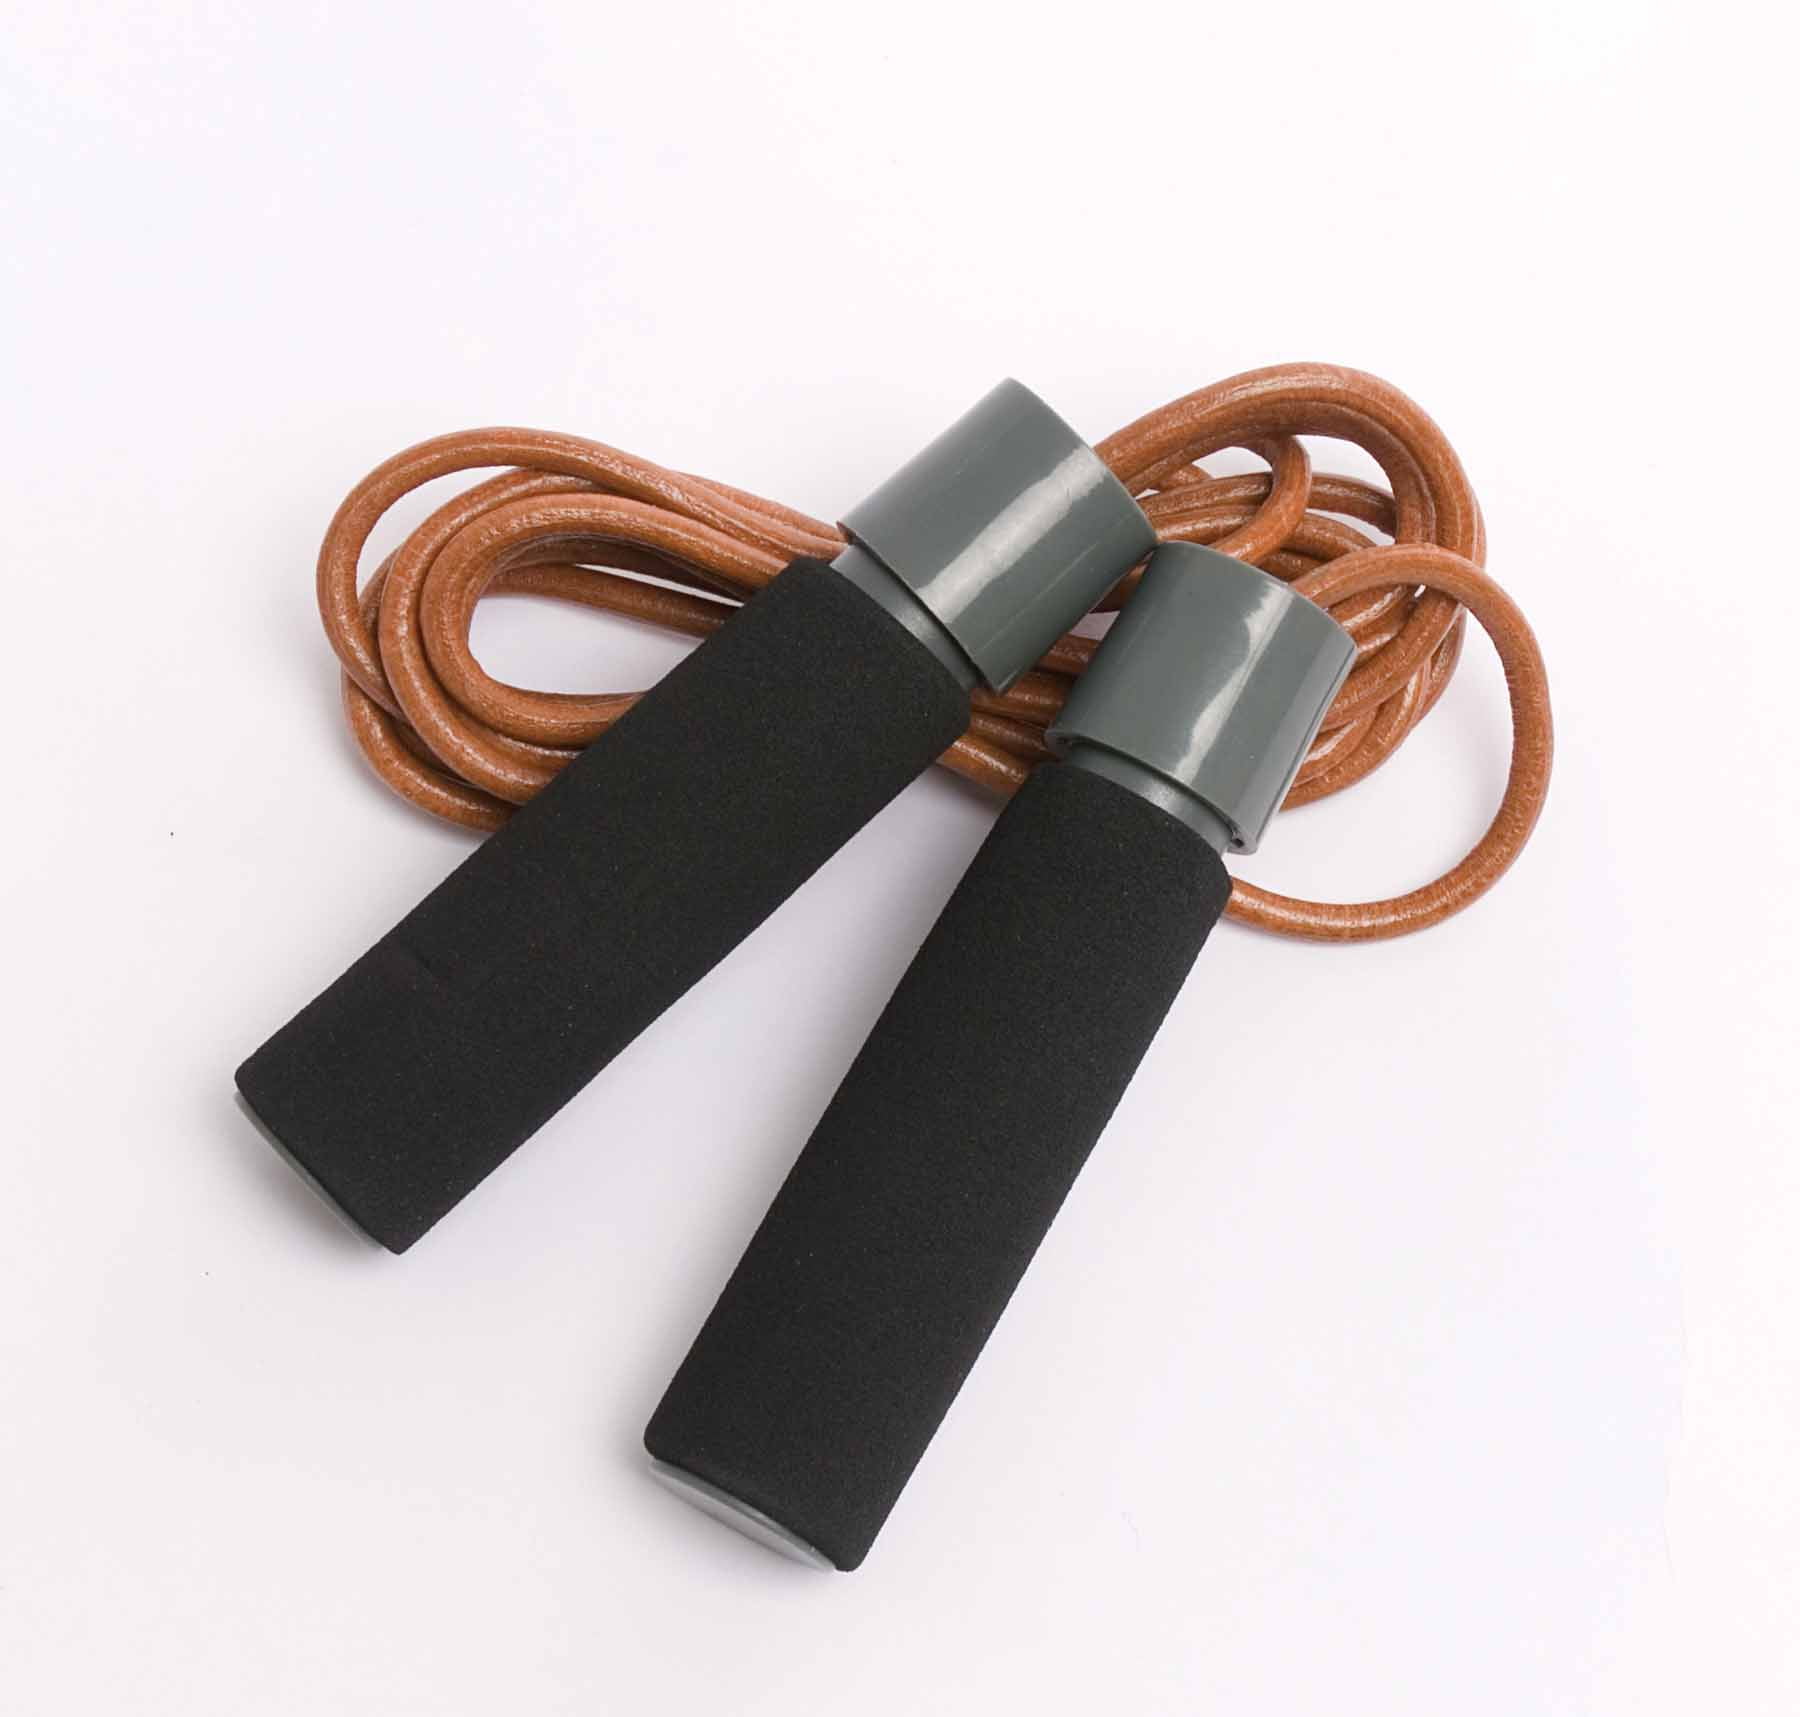 Details about   Electronic Counting Jumping Rope 360 Rotatable Bearing Student Rop Black Purple 